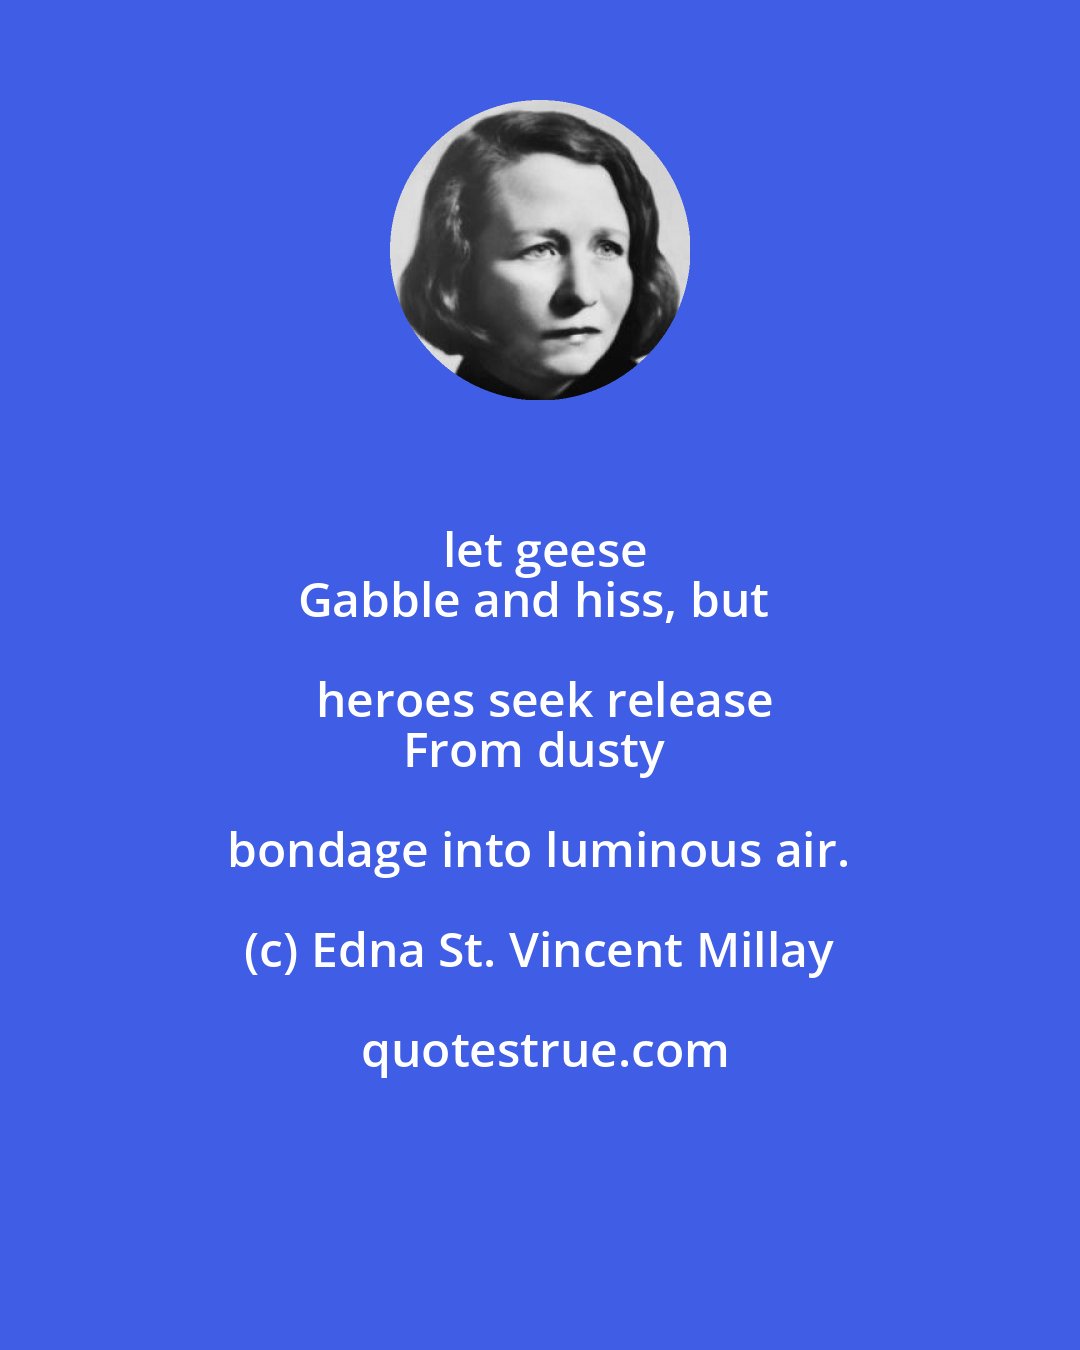 Edna St. Vincent Millay: let geese
Gabble and hiss, but heroes seek release
From dusty bondage into luminous air.